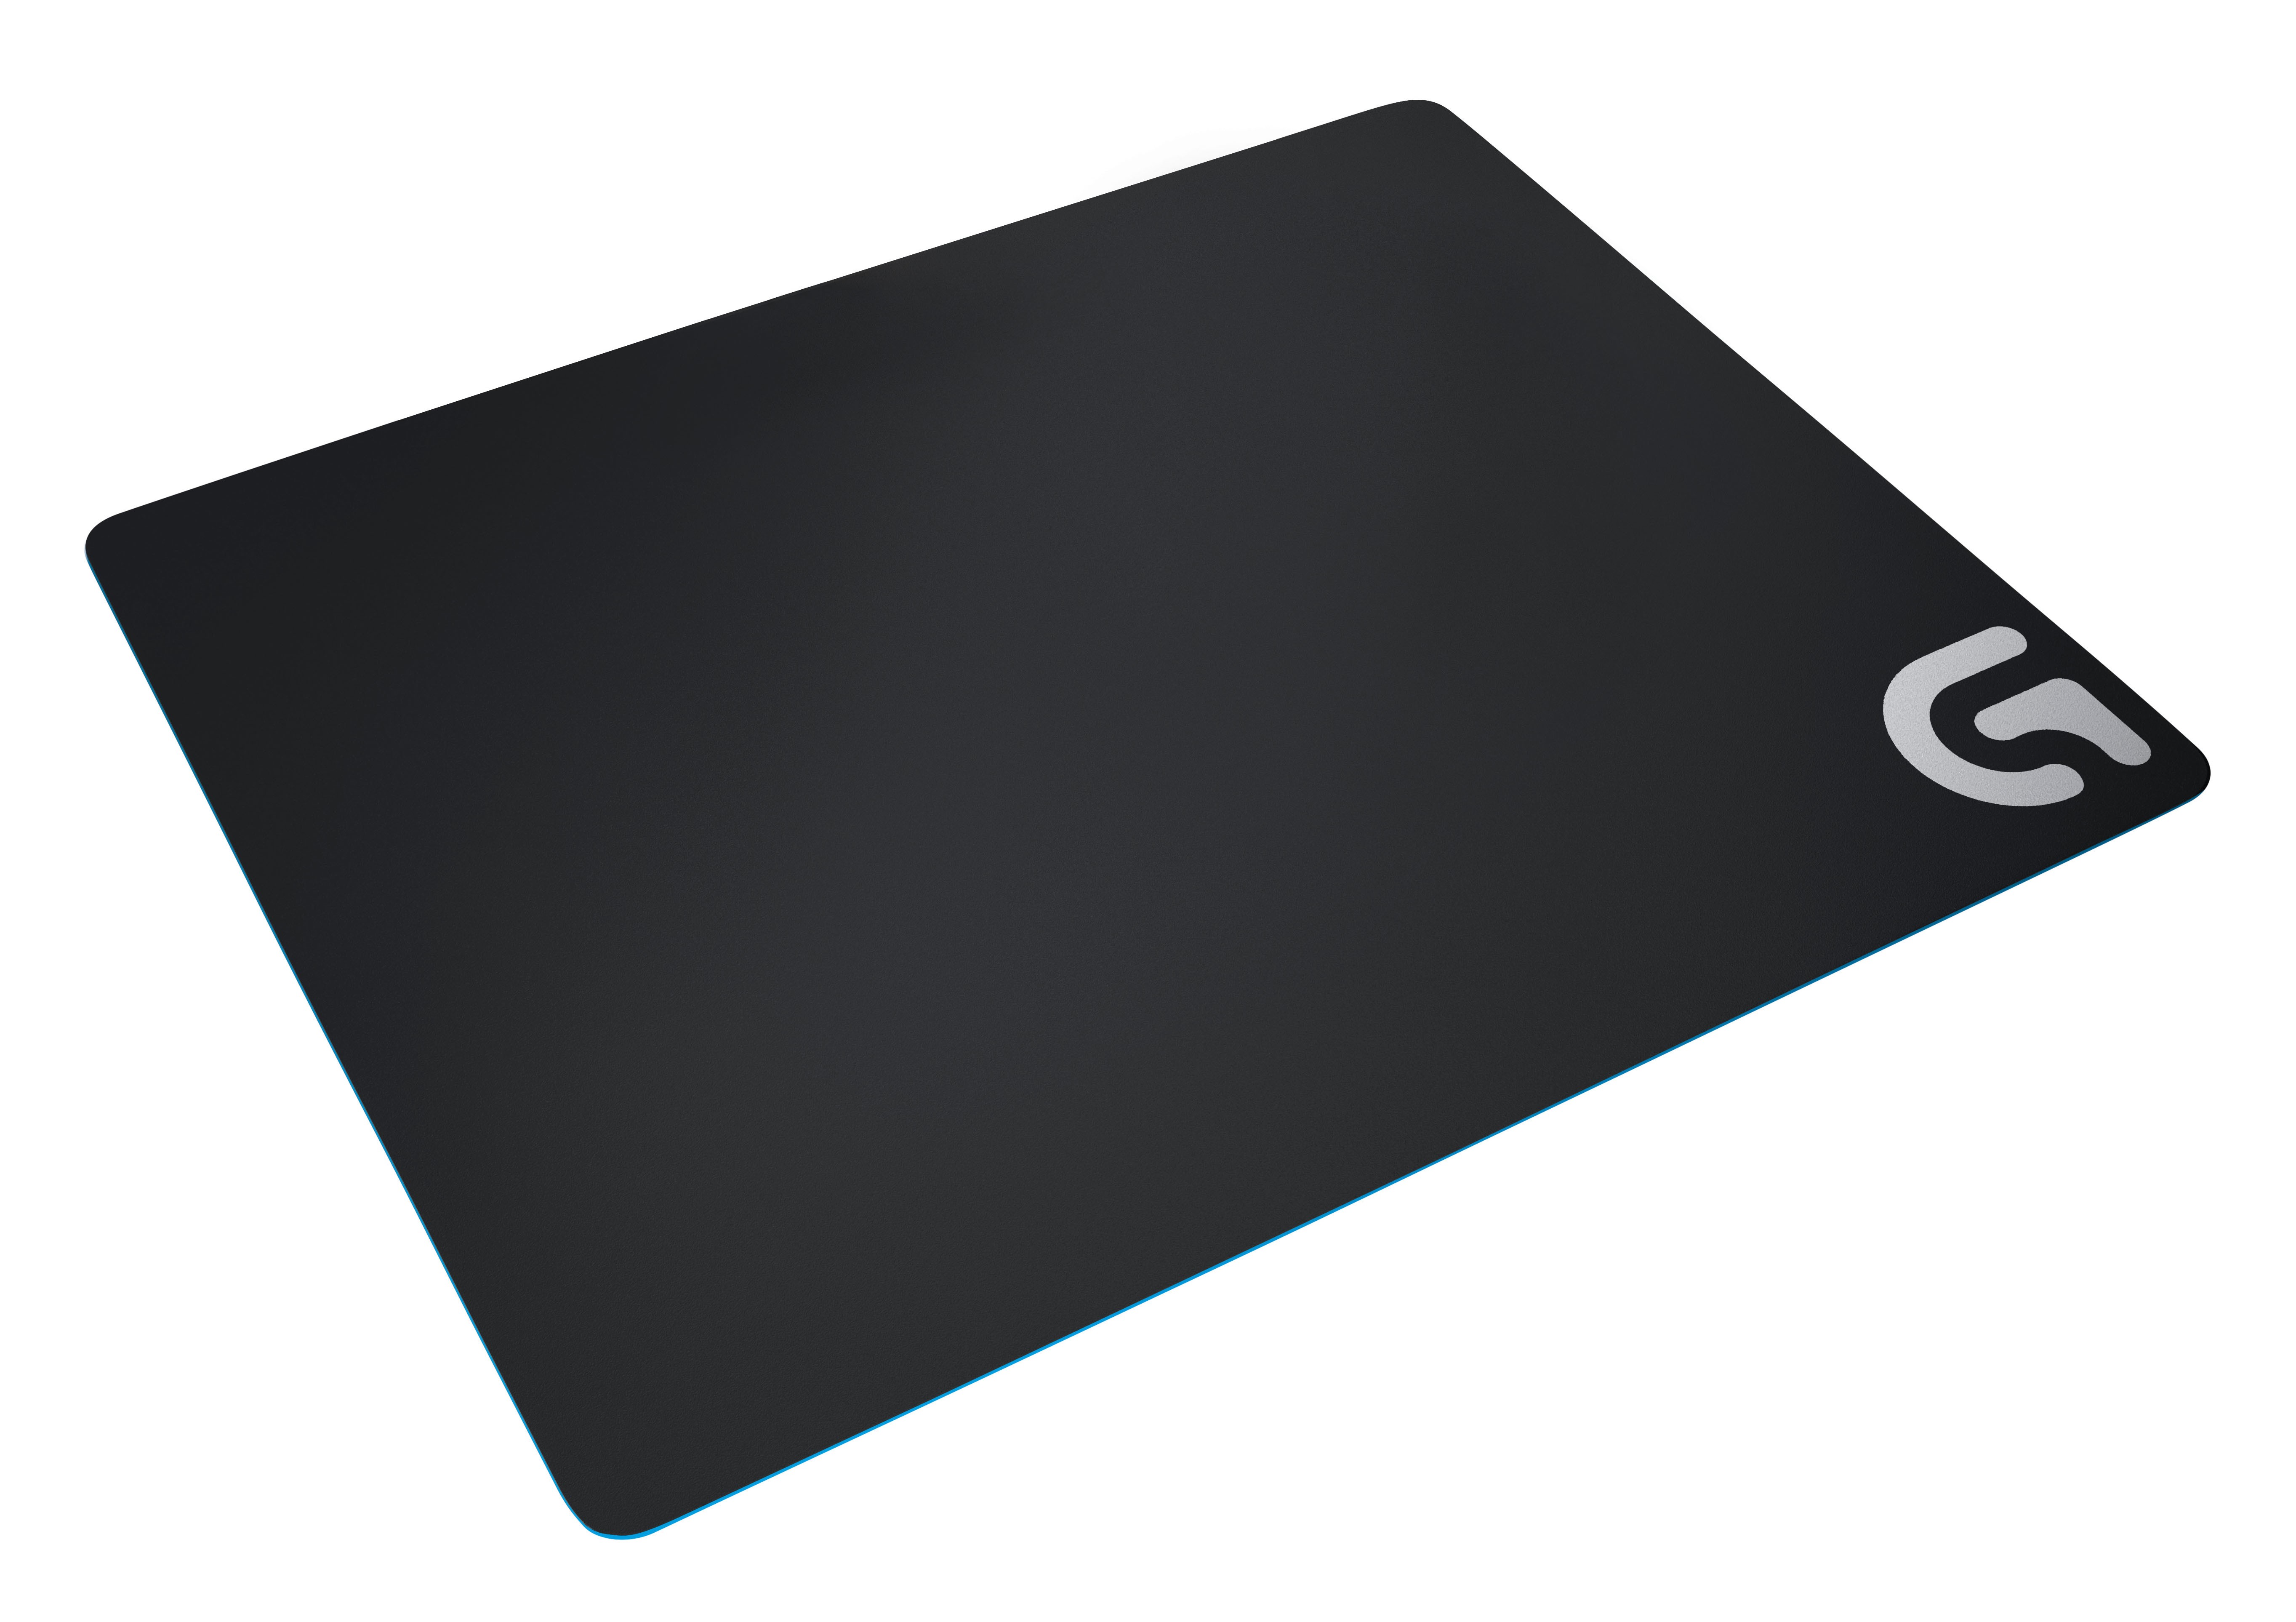 Logitech G G440 Hard Gaming Mouse Pad Tappetino per mouse per